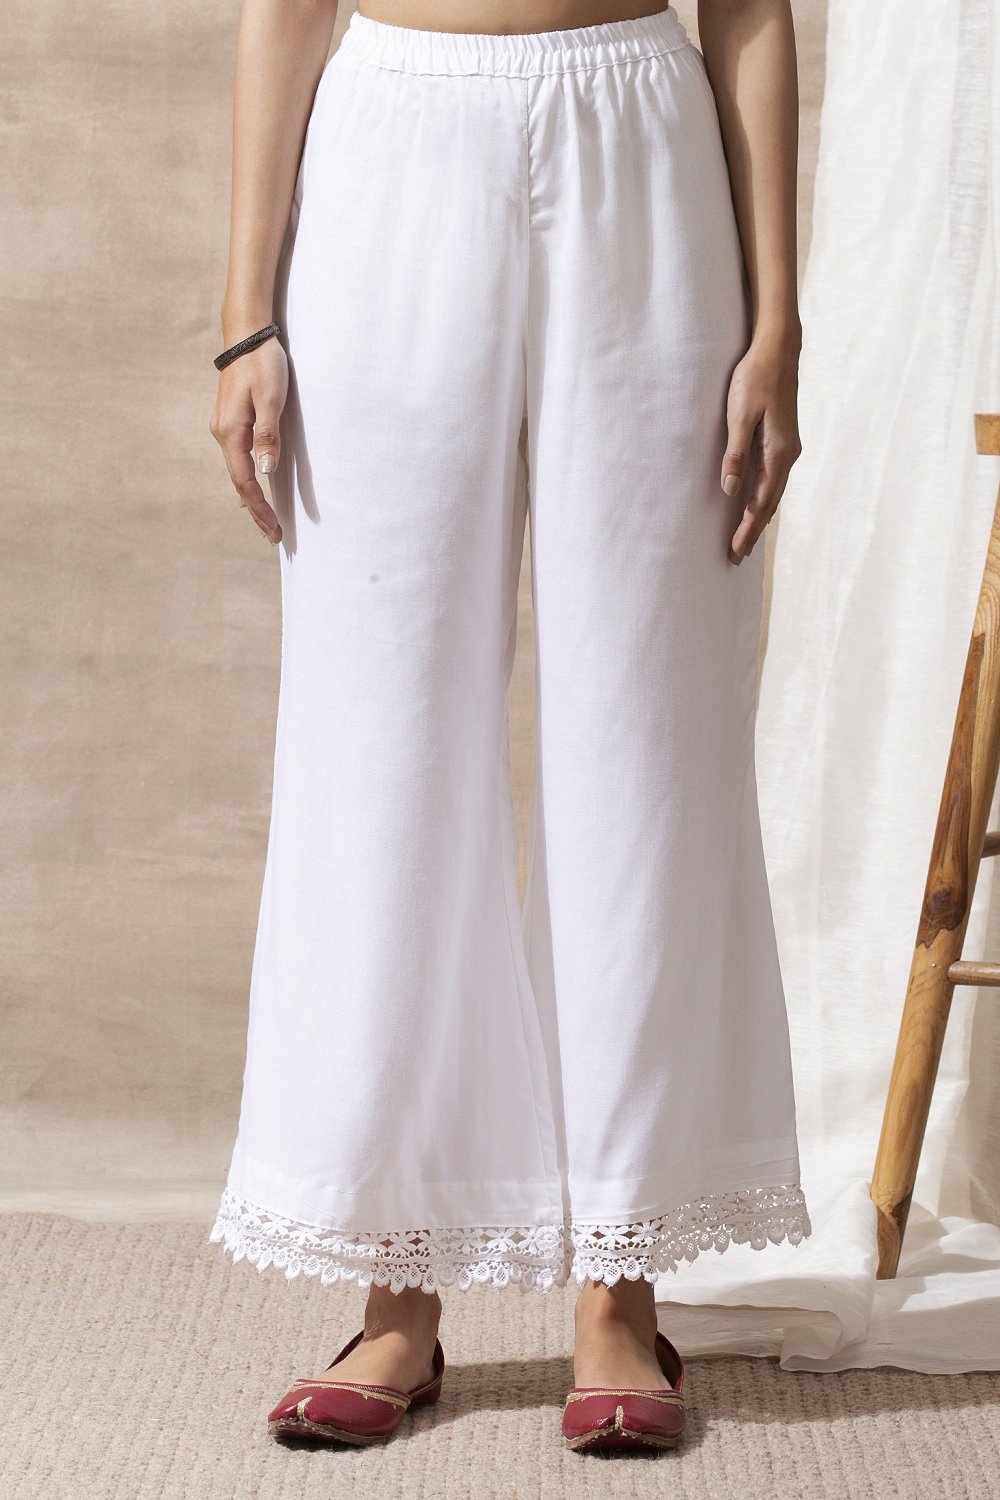 White Cotton Palazzos with Broad Decorative Lace